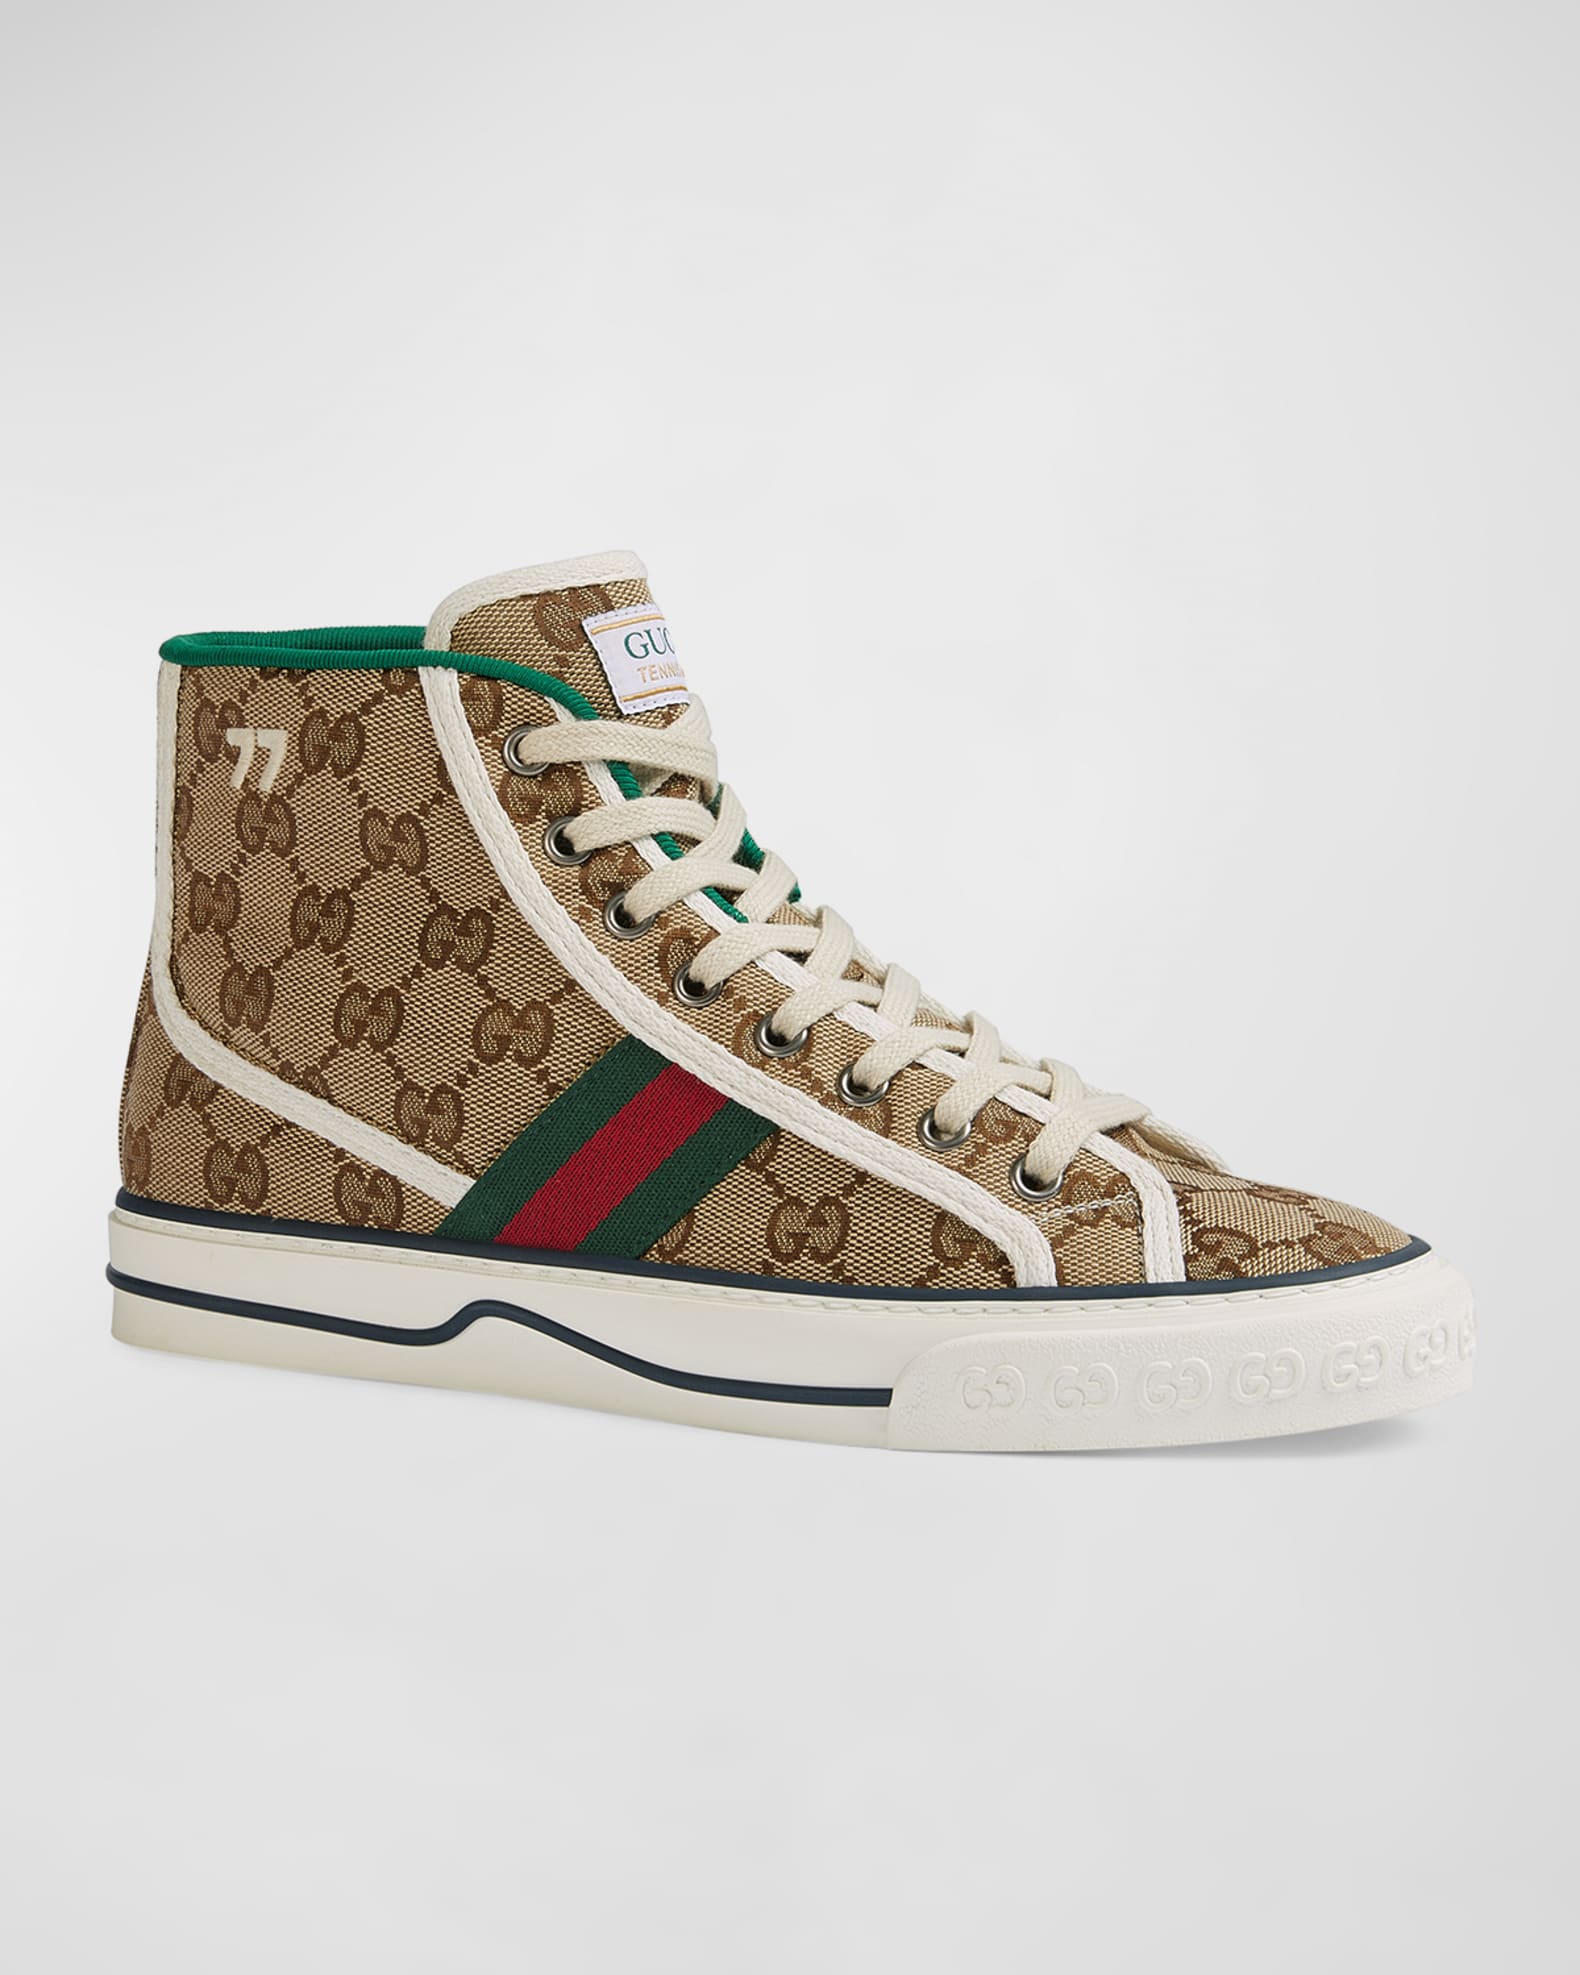 Gucci Gucci Tennis 1977 High Top Sneakers | Neiman Marcus